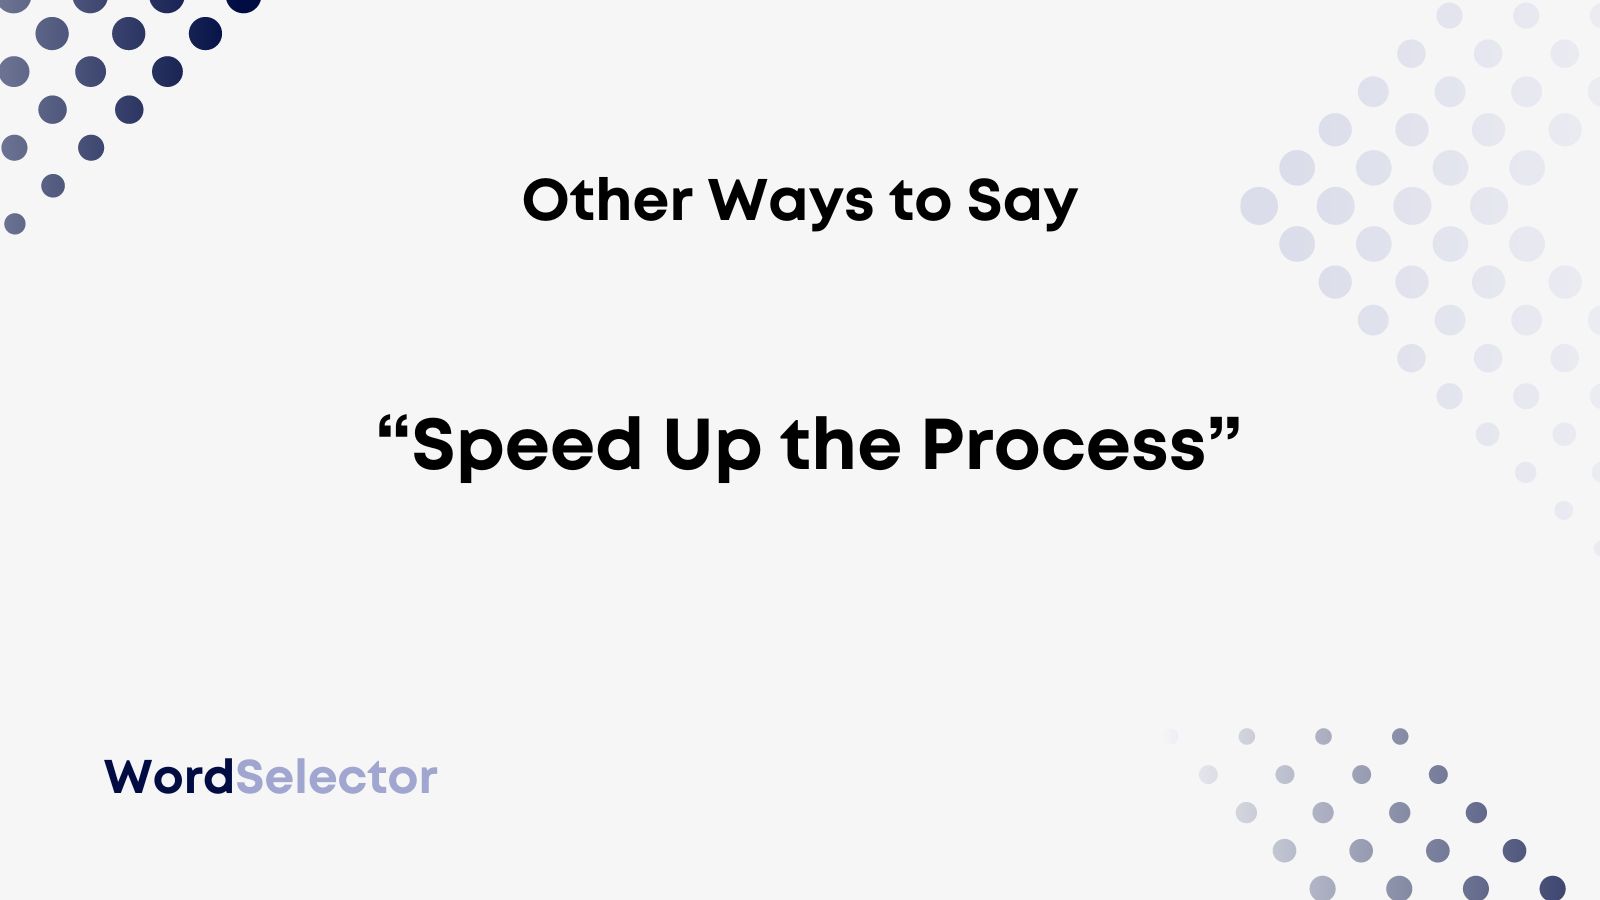 19 Other Ways to Say “Speed Up the Process” - WordSelector